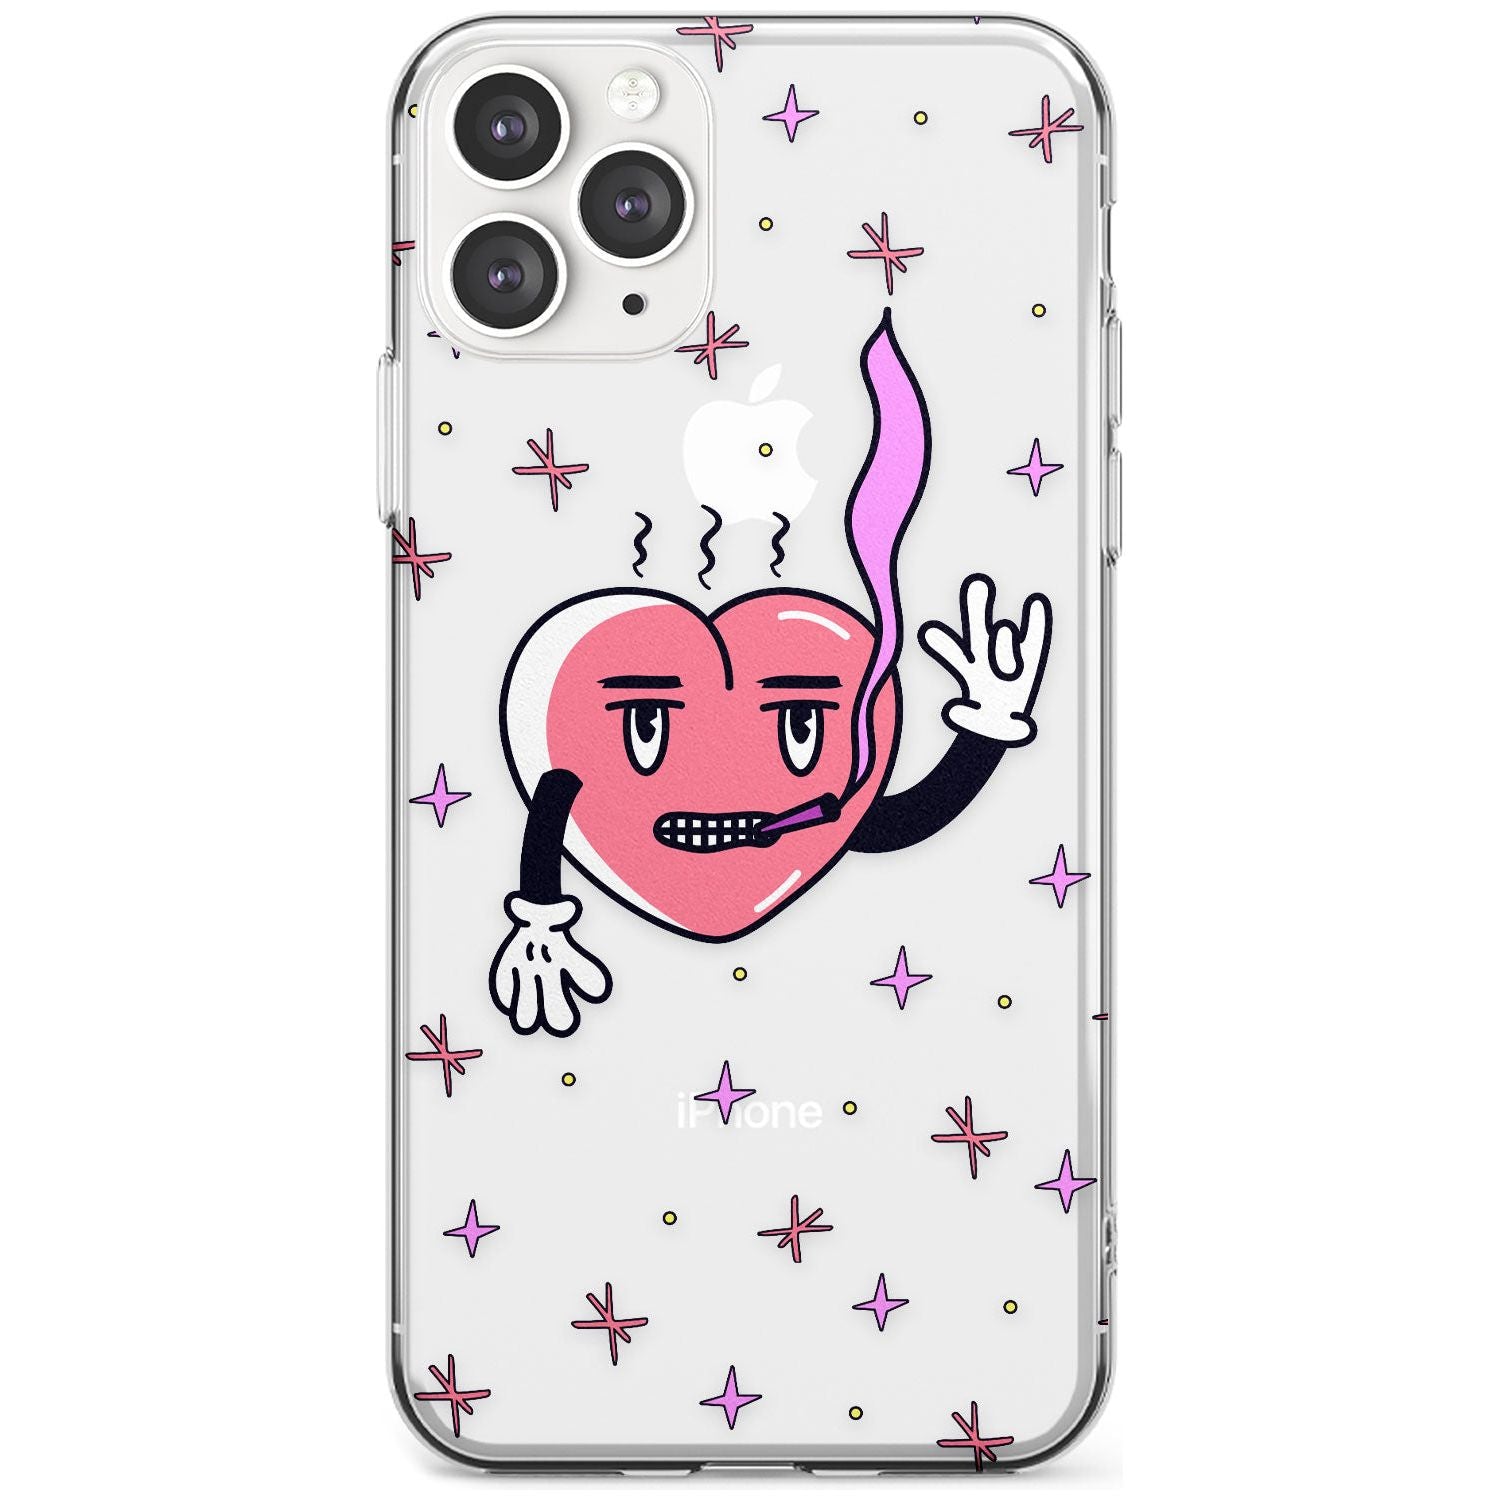 Rock n Roll Heart (Clear) Slim TPU Phone Case for iPhone 11 Pro Max